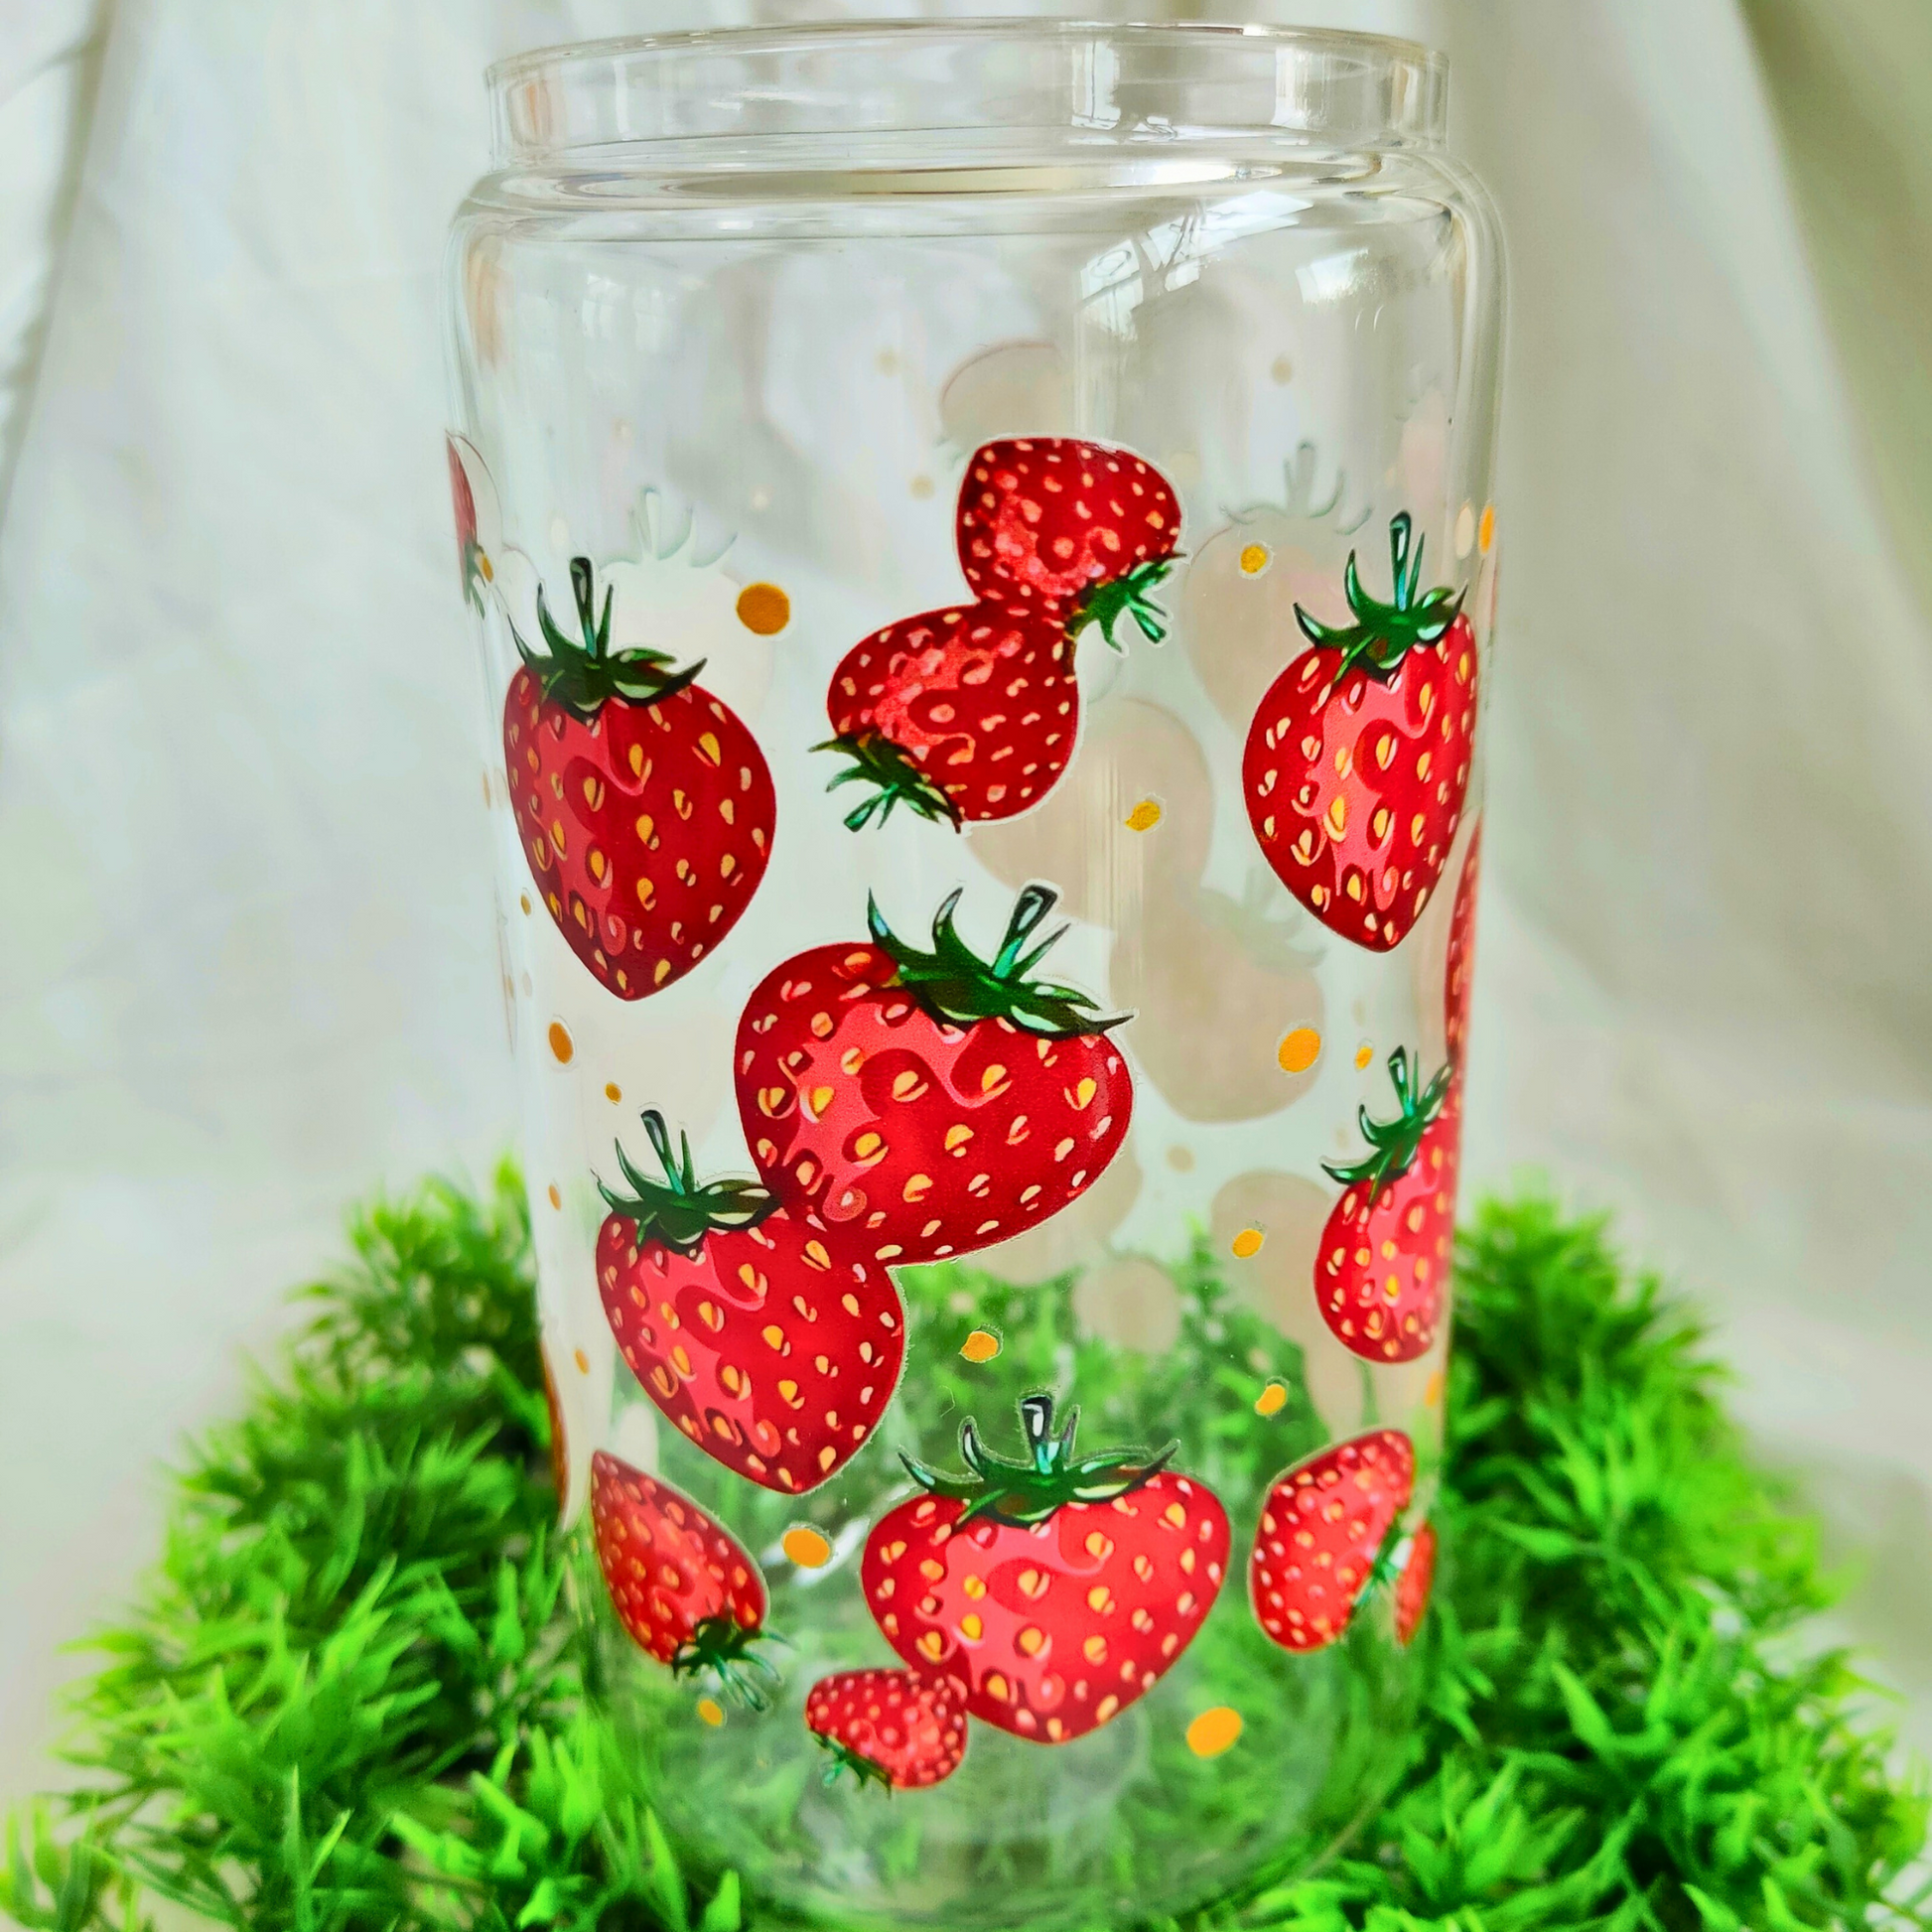 16oz Dishwasher Safe Strawberries Libbey Can Glass – Print Paper